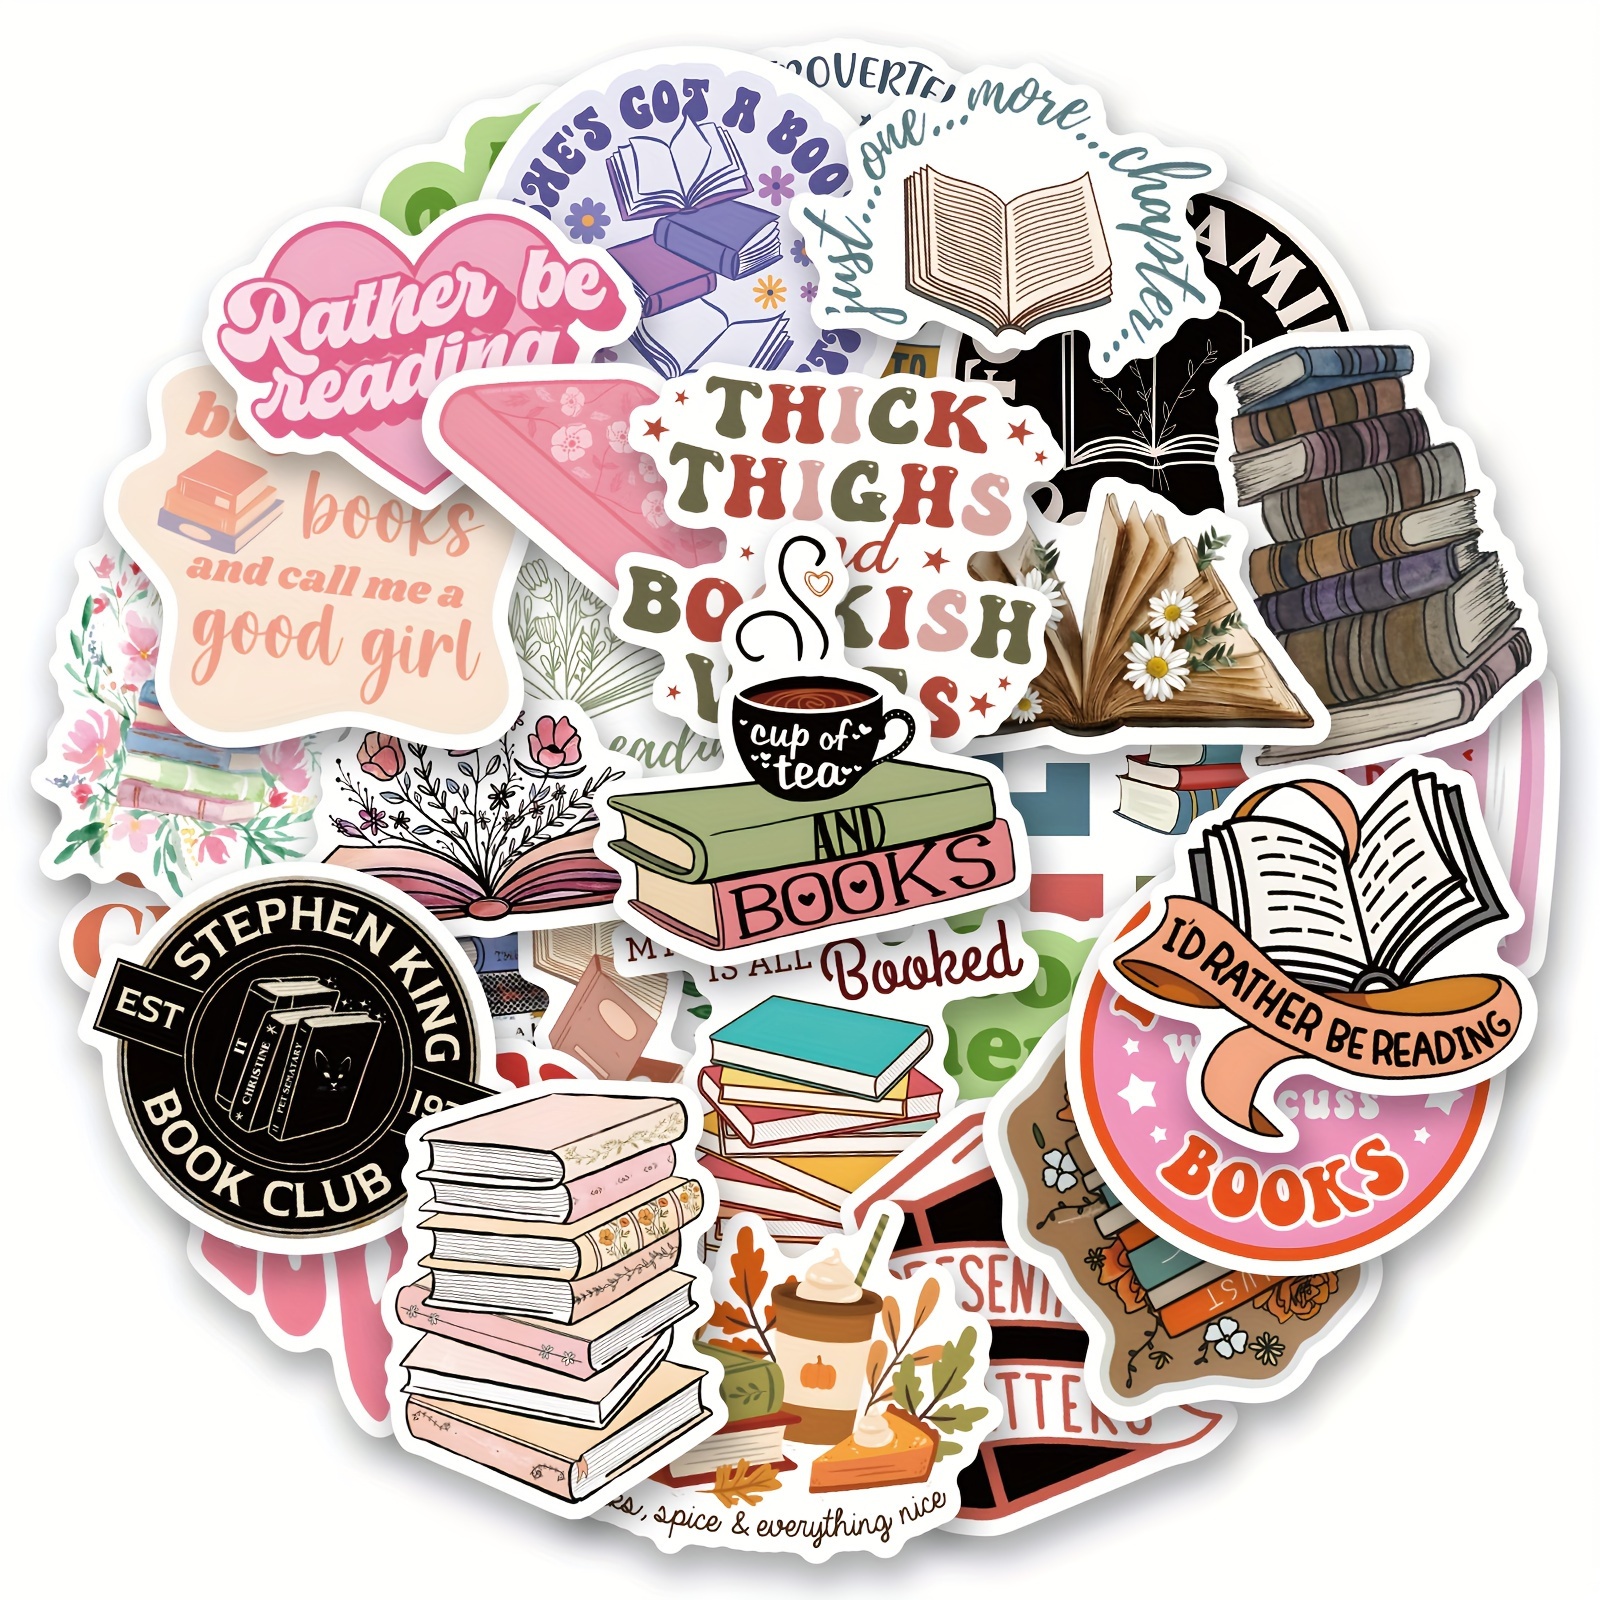 Bookish / Book Lovers / Reading / Book / Kindle Stickers Vinyl Stickers -  24 pcs